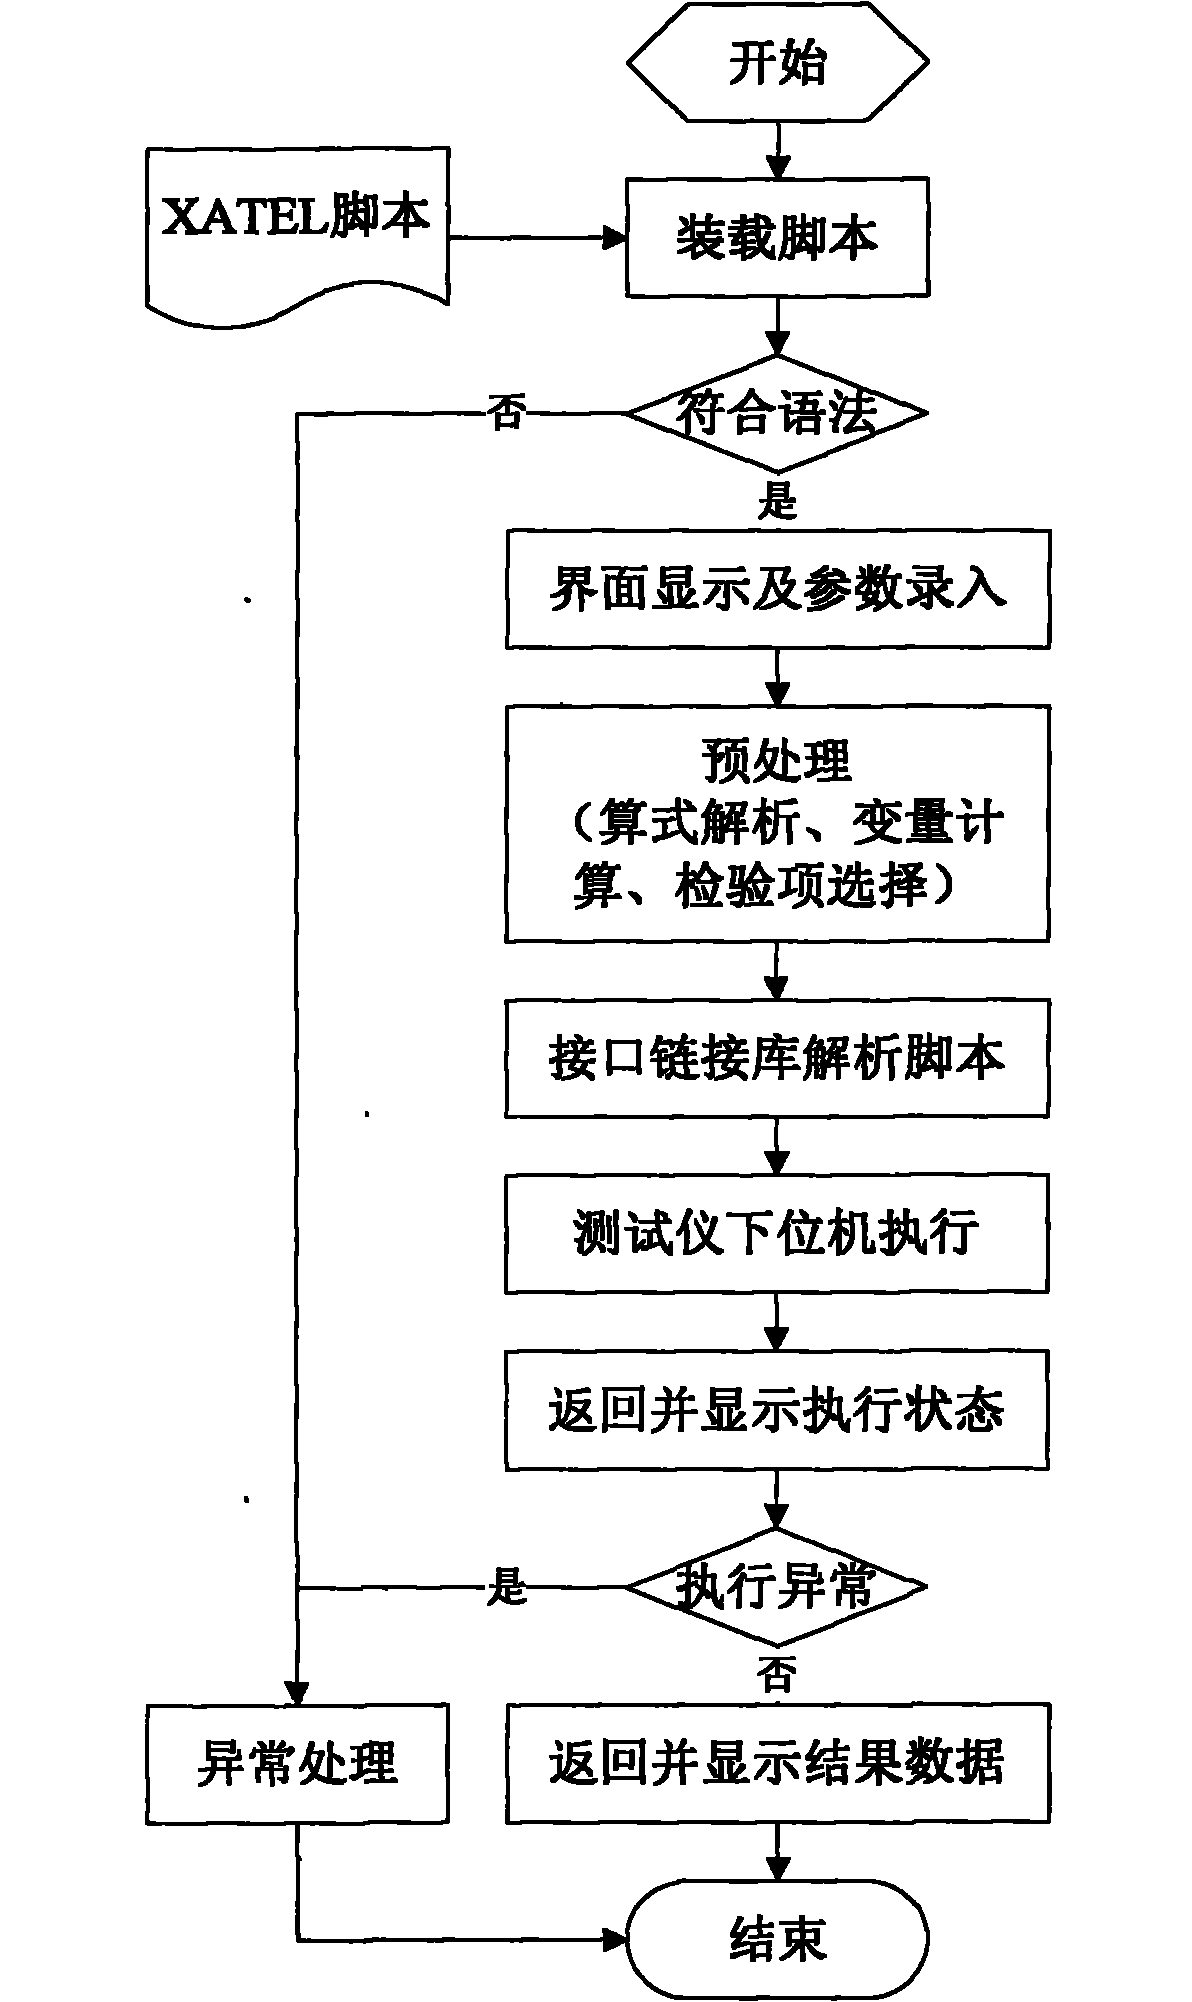 Description method of automatic inspection of relay protection device